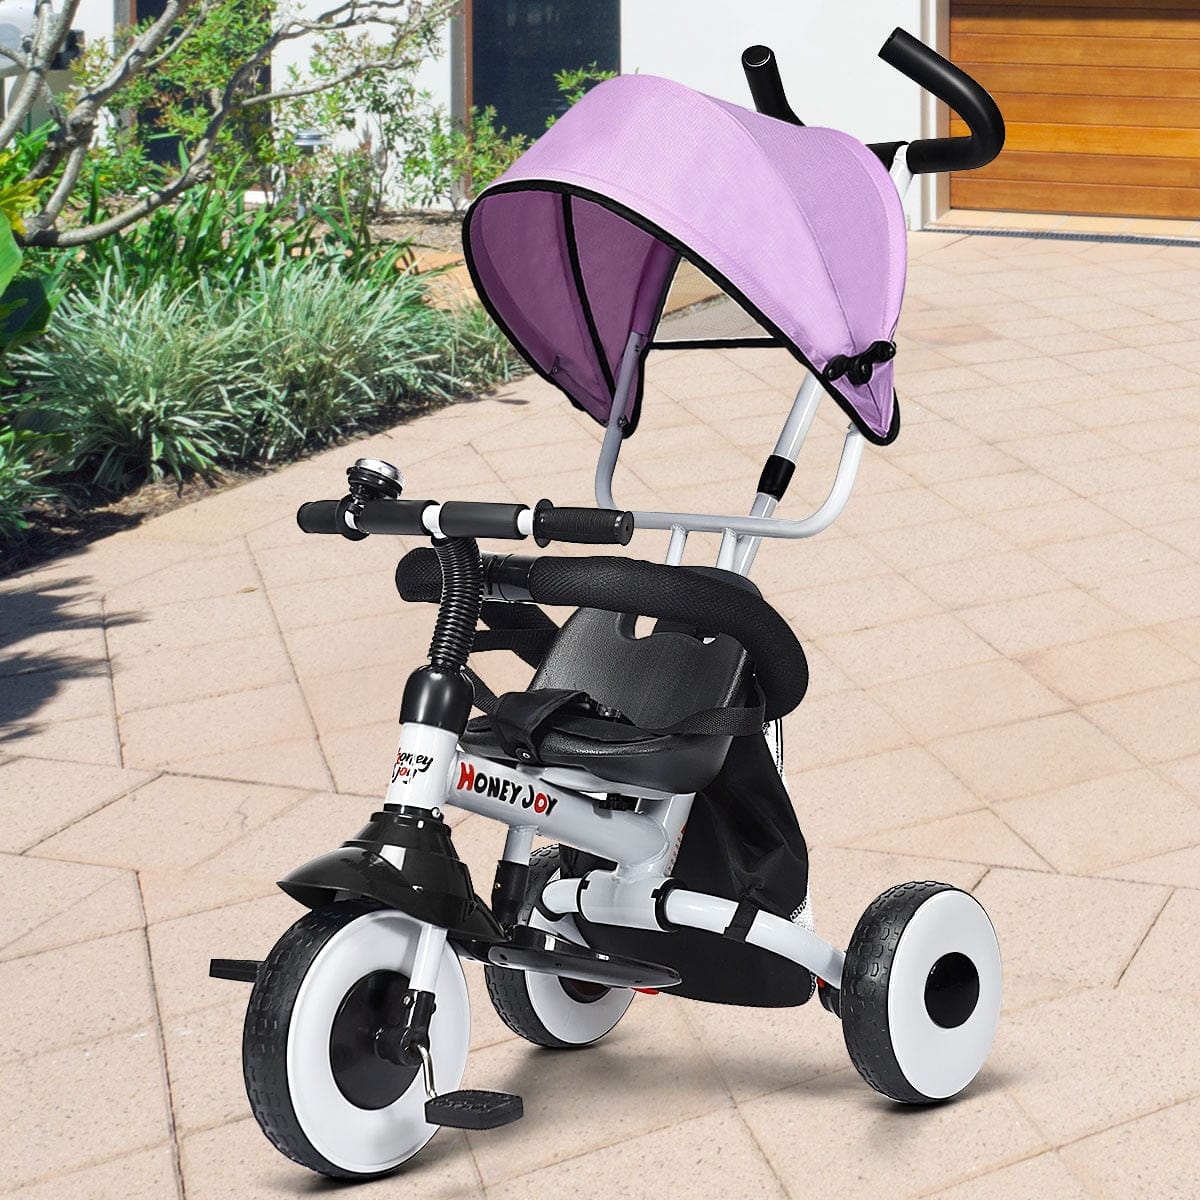 Proactive Baby HoneyJoy™ Best Baby Stroller cum Tricycle For age 0-60 Months Babies